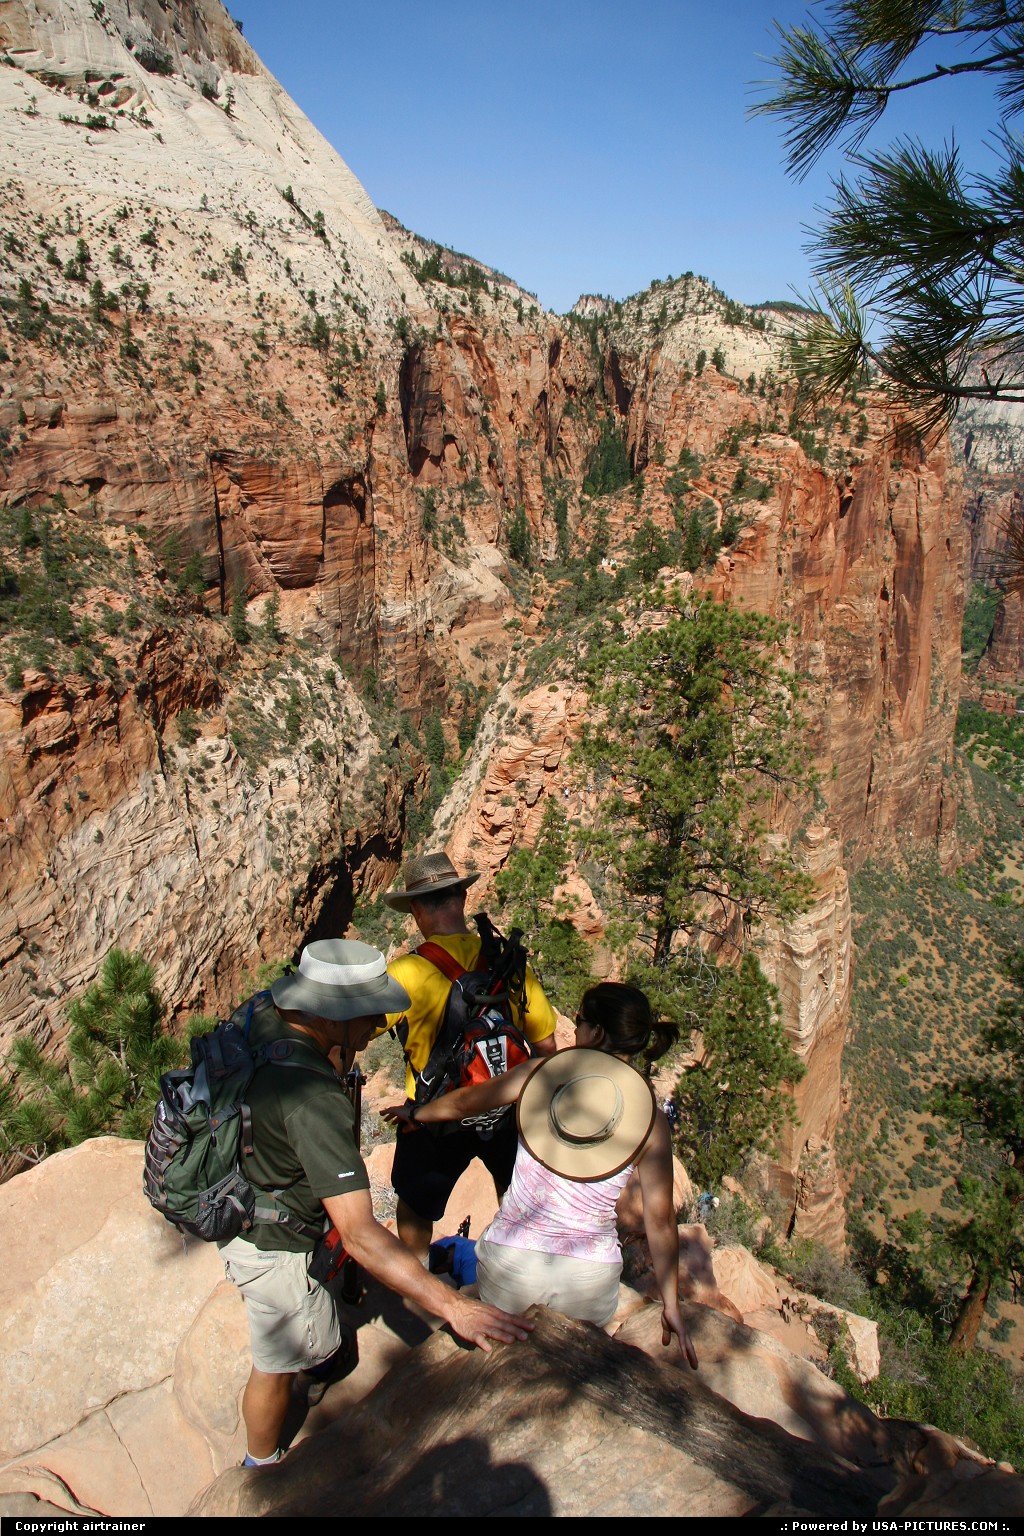 Picture by airtrainer:  Utah Zion Angels Landing 